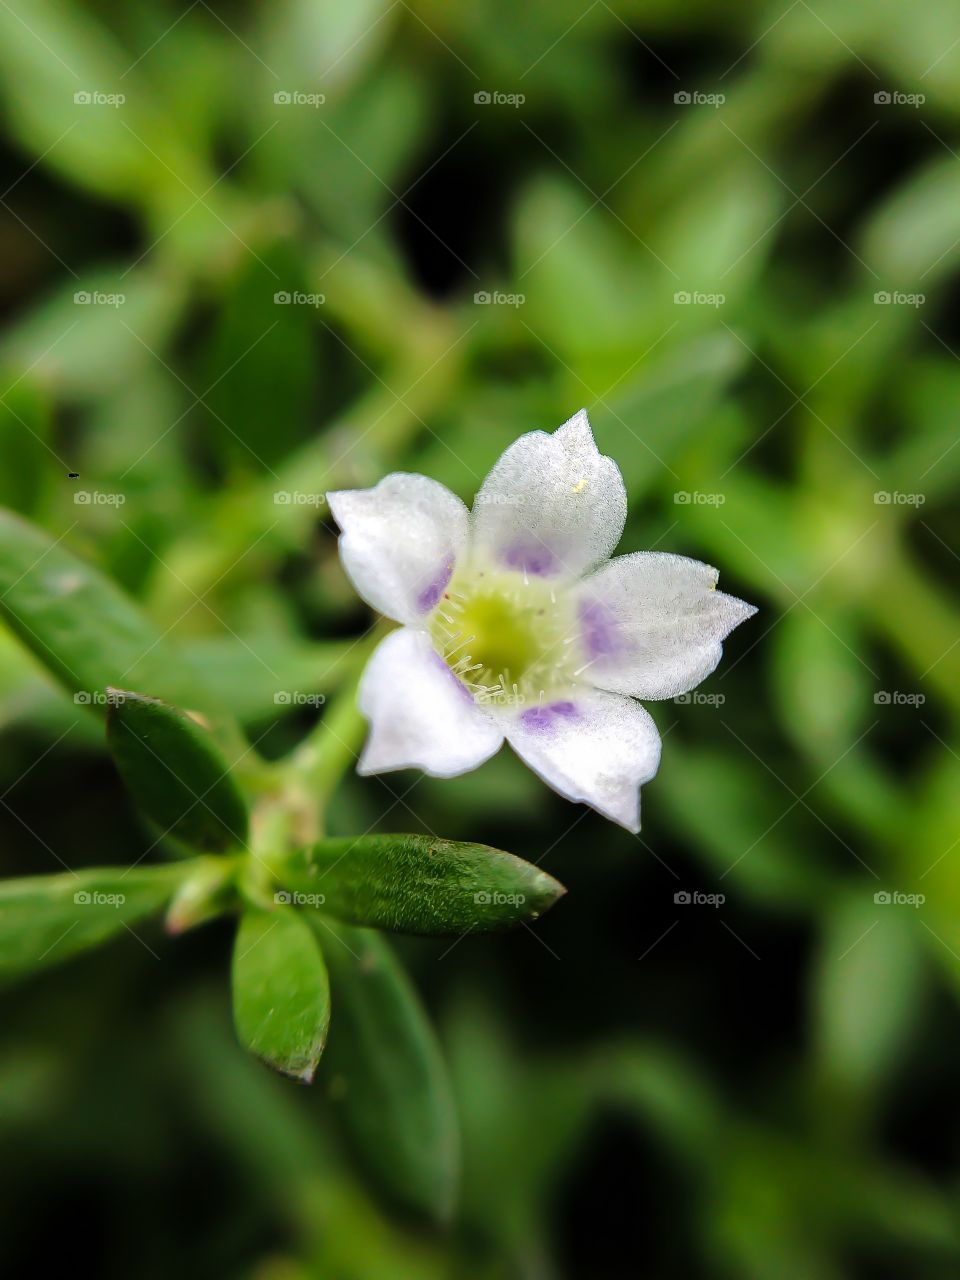 A small white flower 